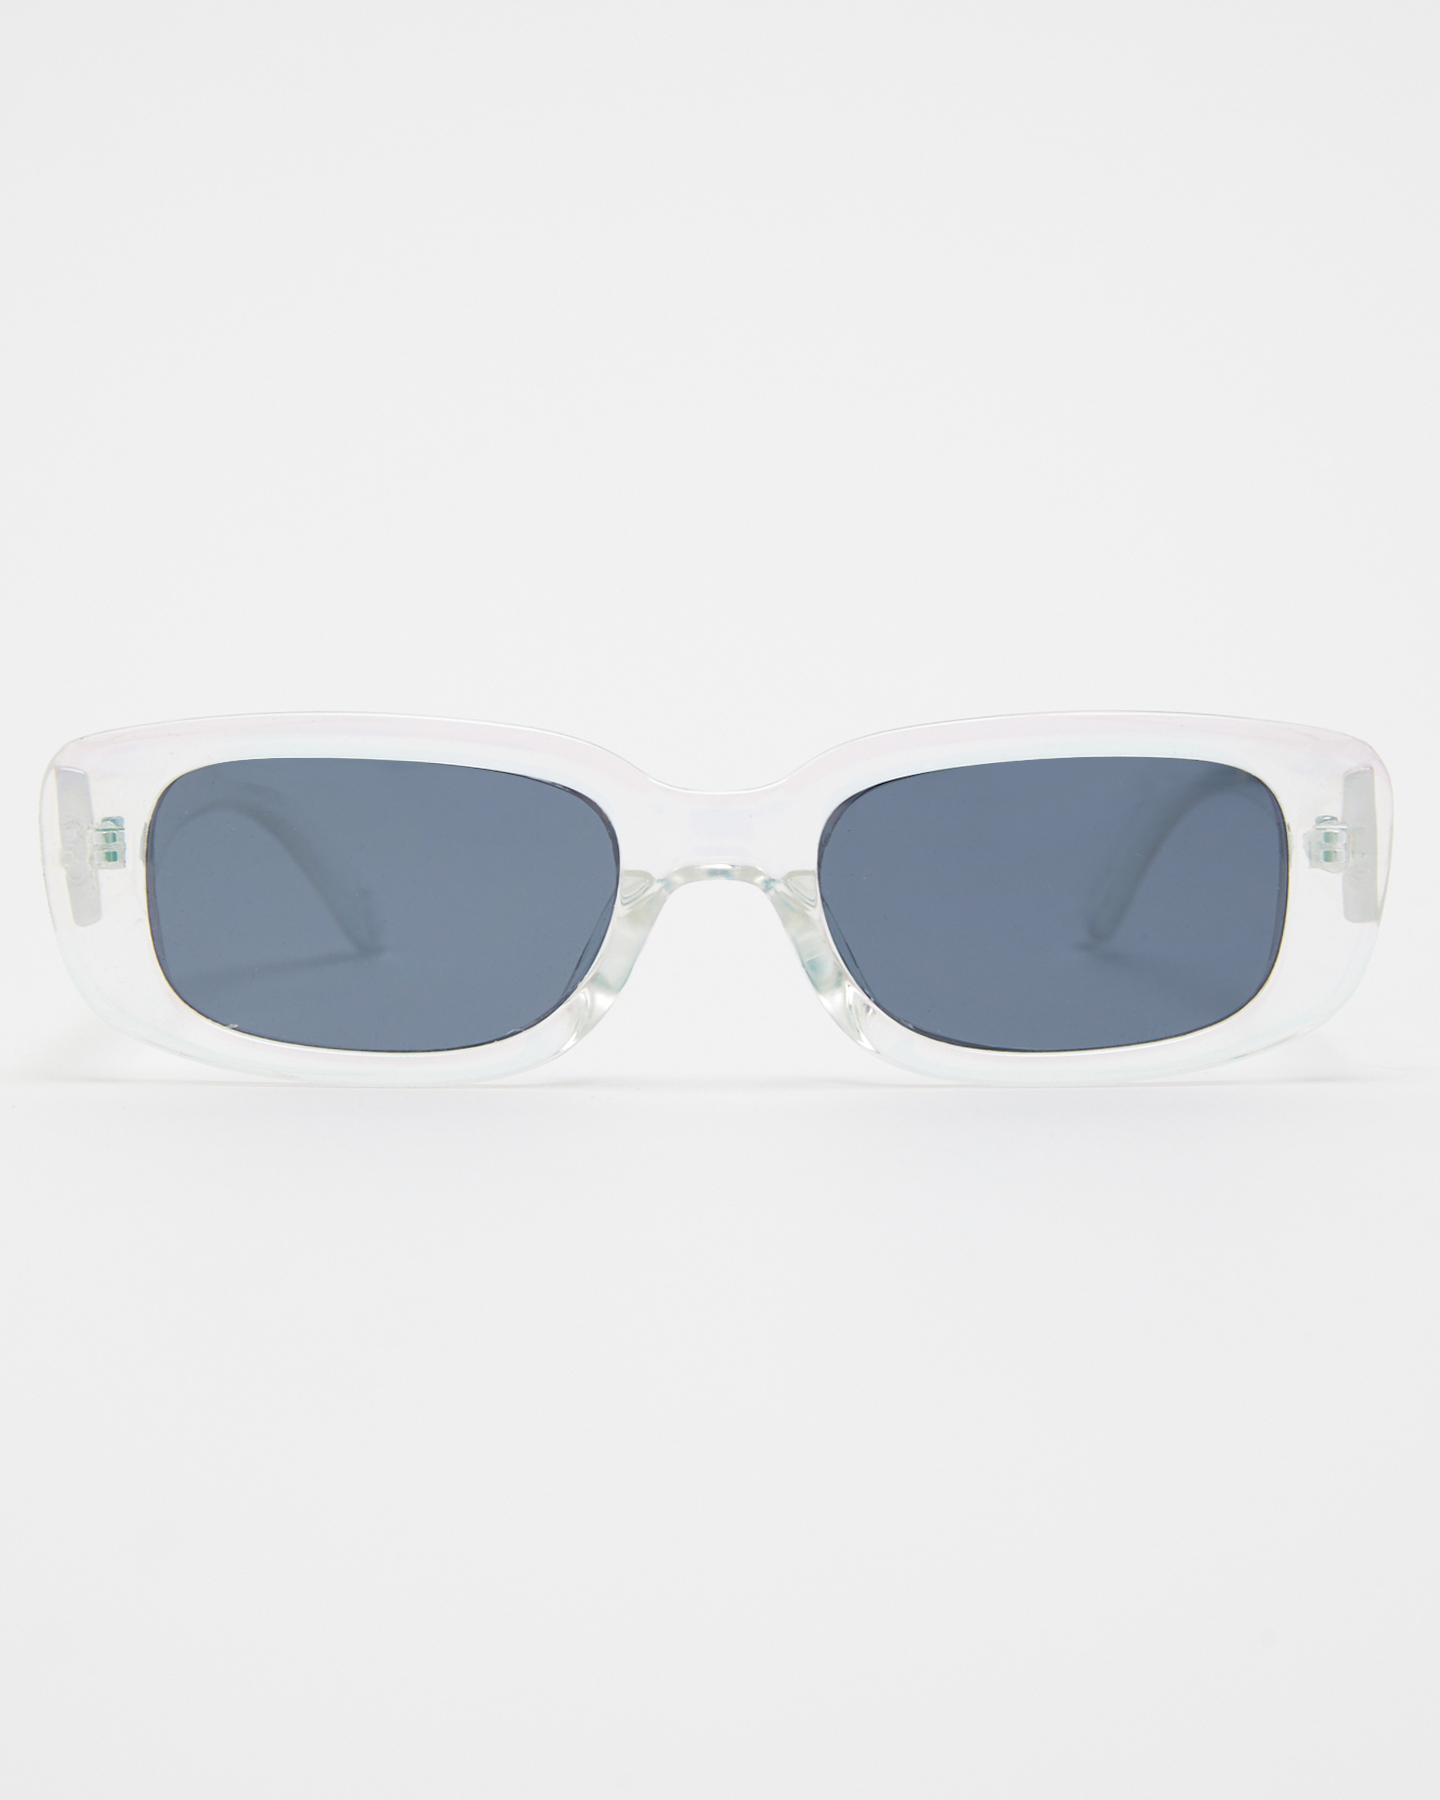 Aire Ceres Sunglasses - Iridescent Shimmer | SurfStitch